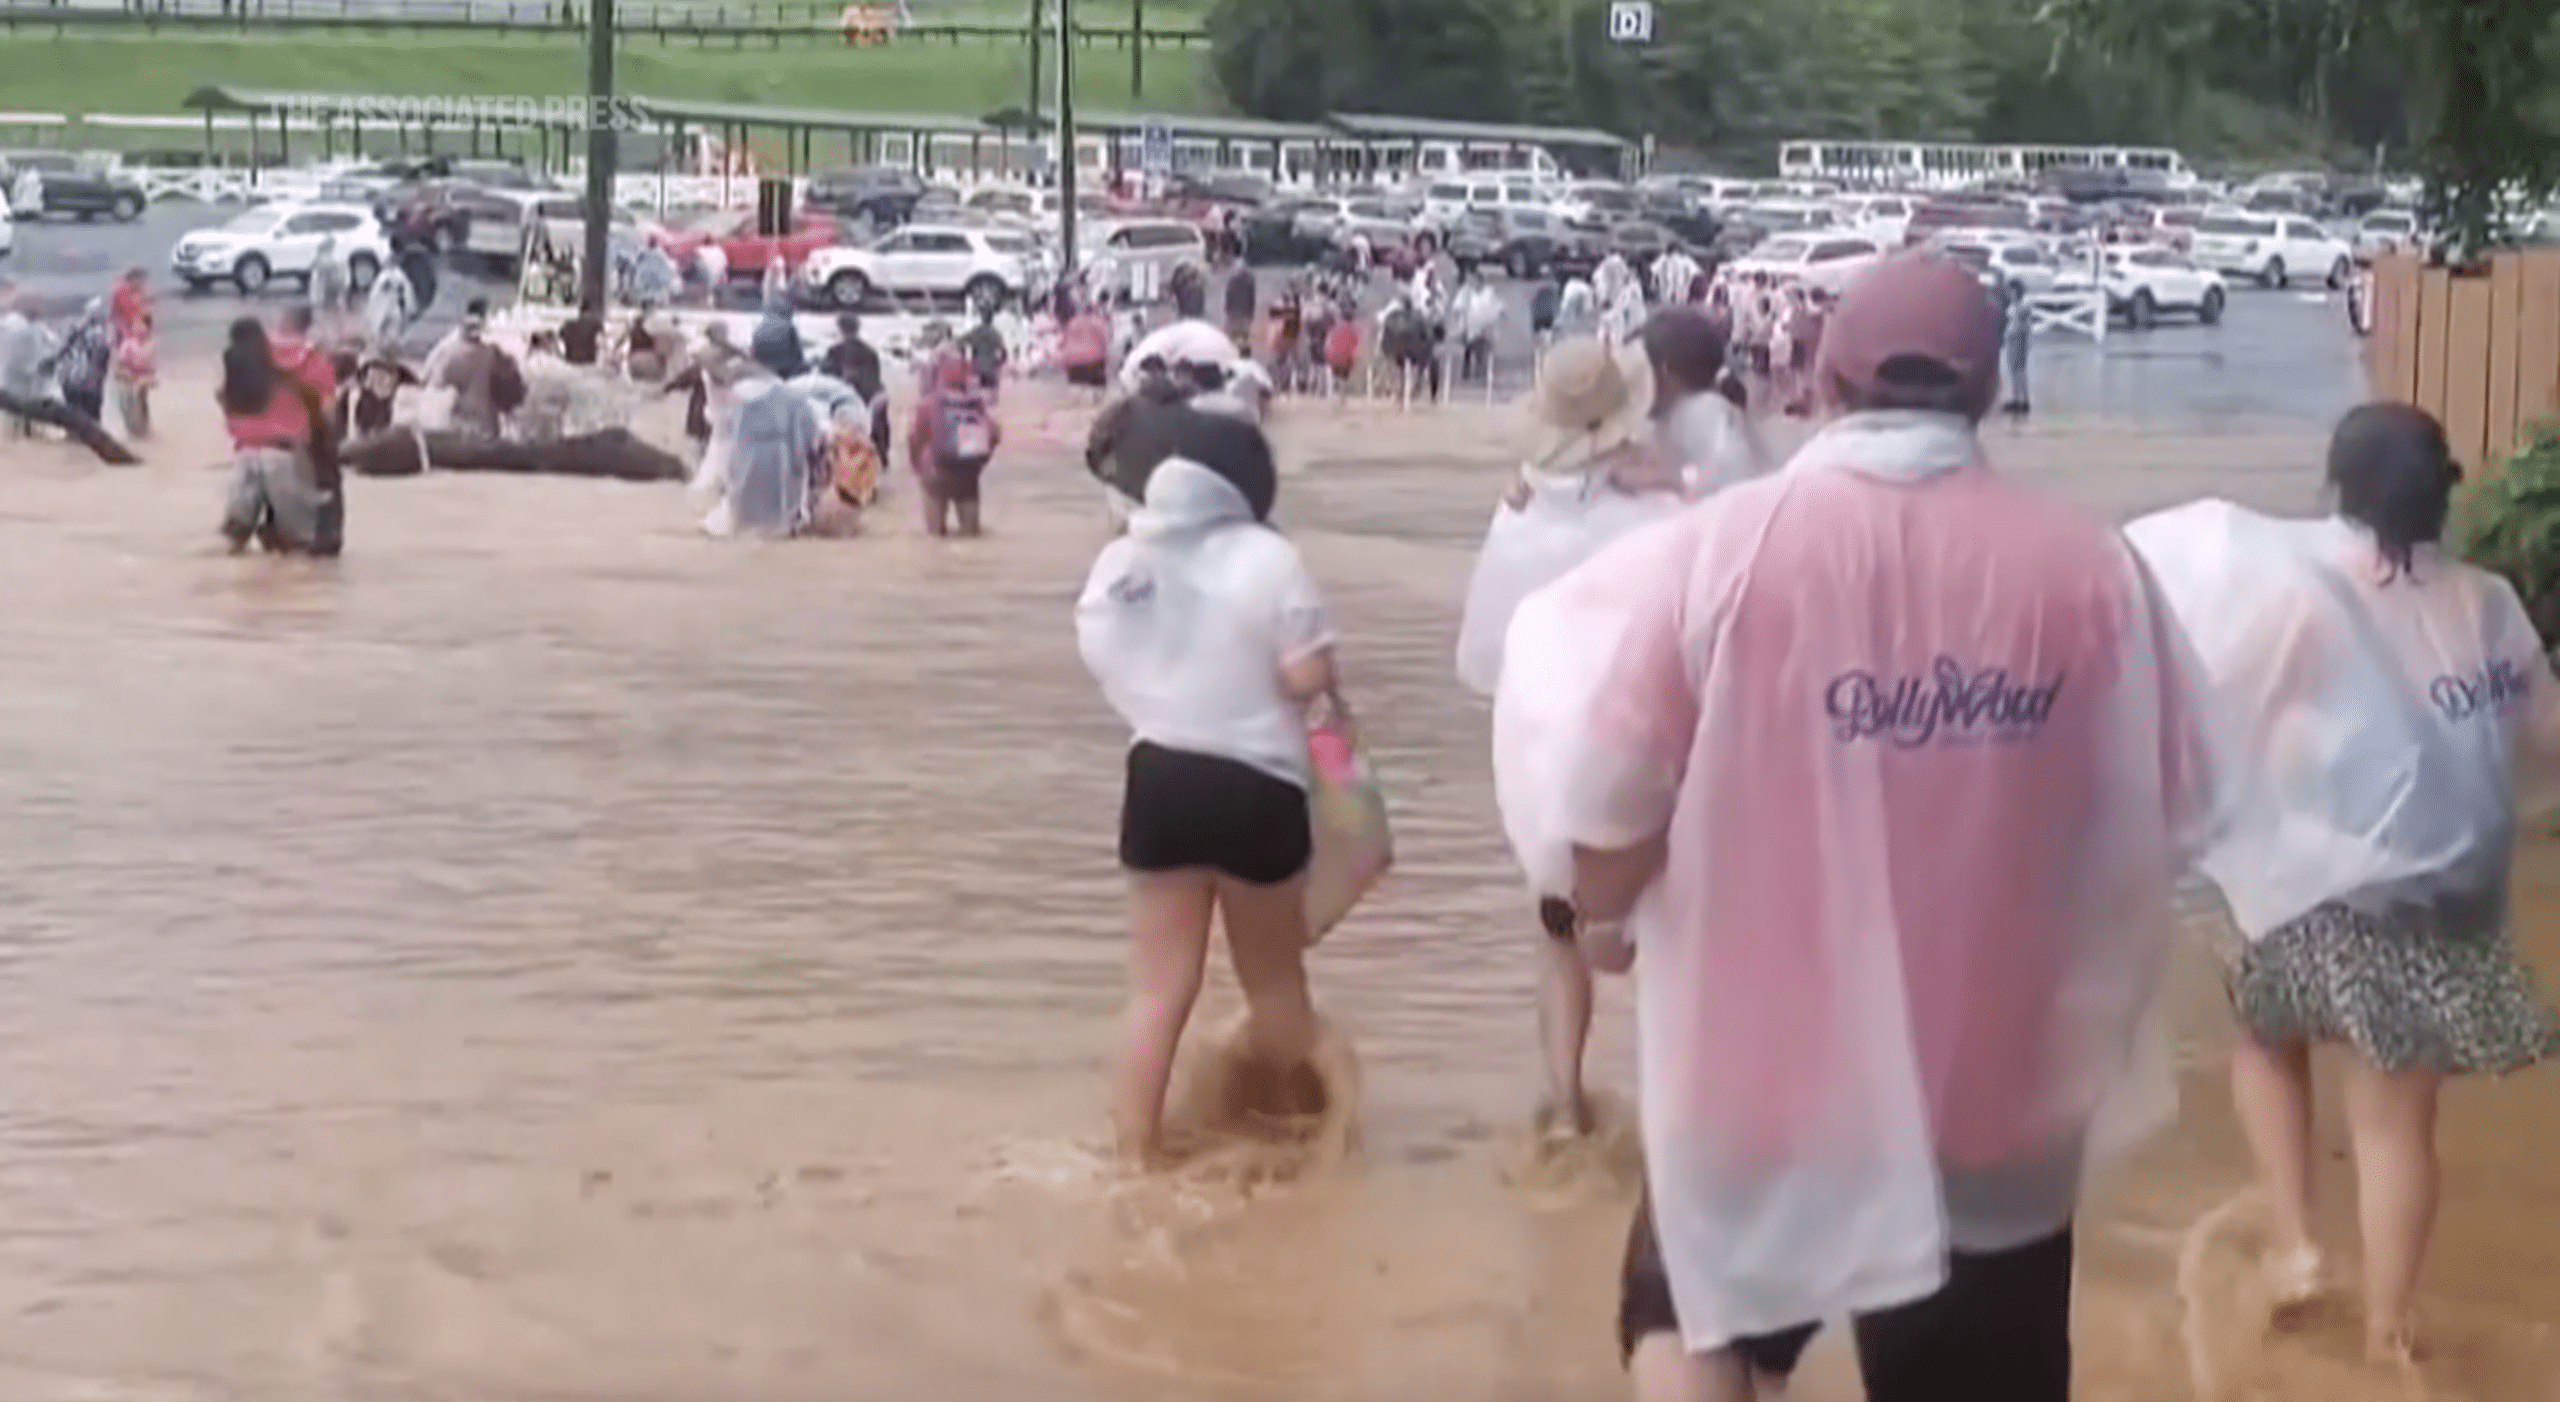 Storms bring flood to Dollywood amusement park in Tennessee